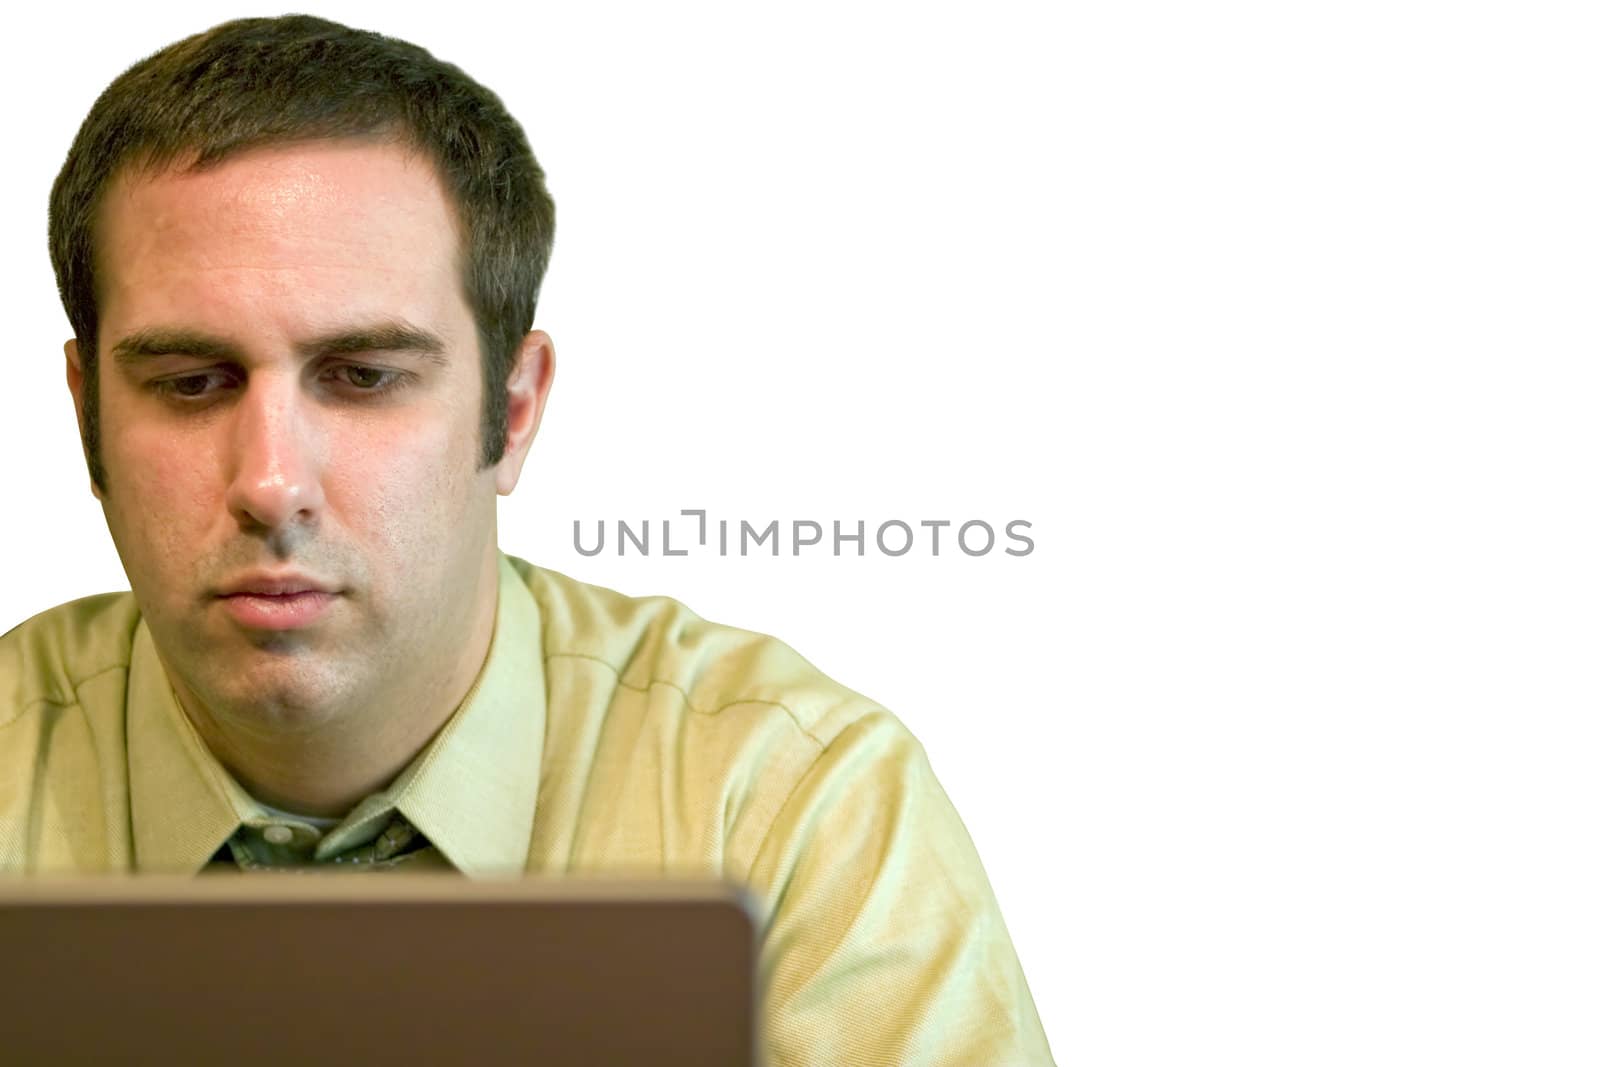 A young business man working from home on his laptop.  Plenty of copy space - image includes clipping path.